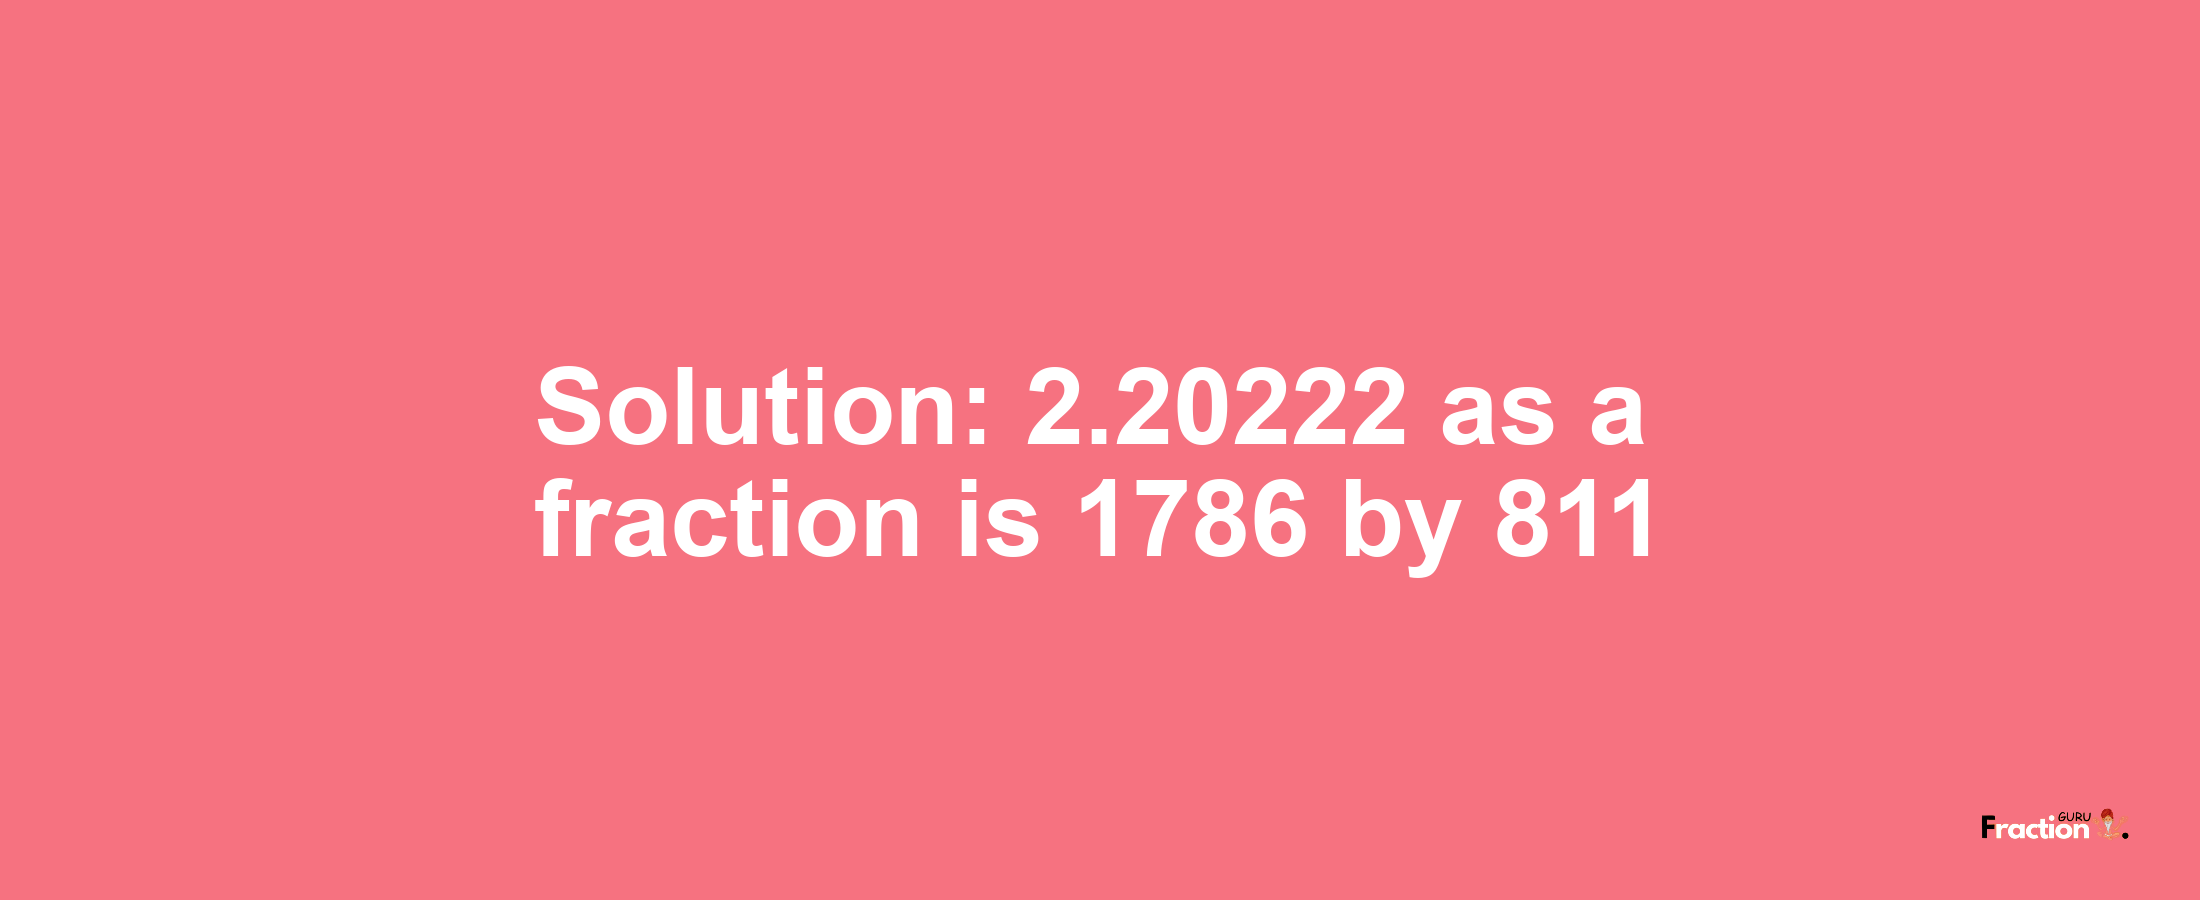 Solution:2.20222 as a fraction is 1786/811